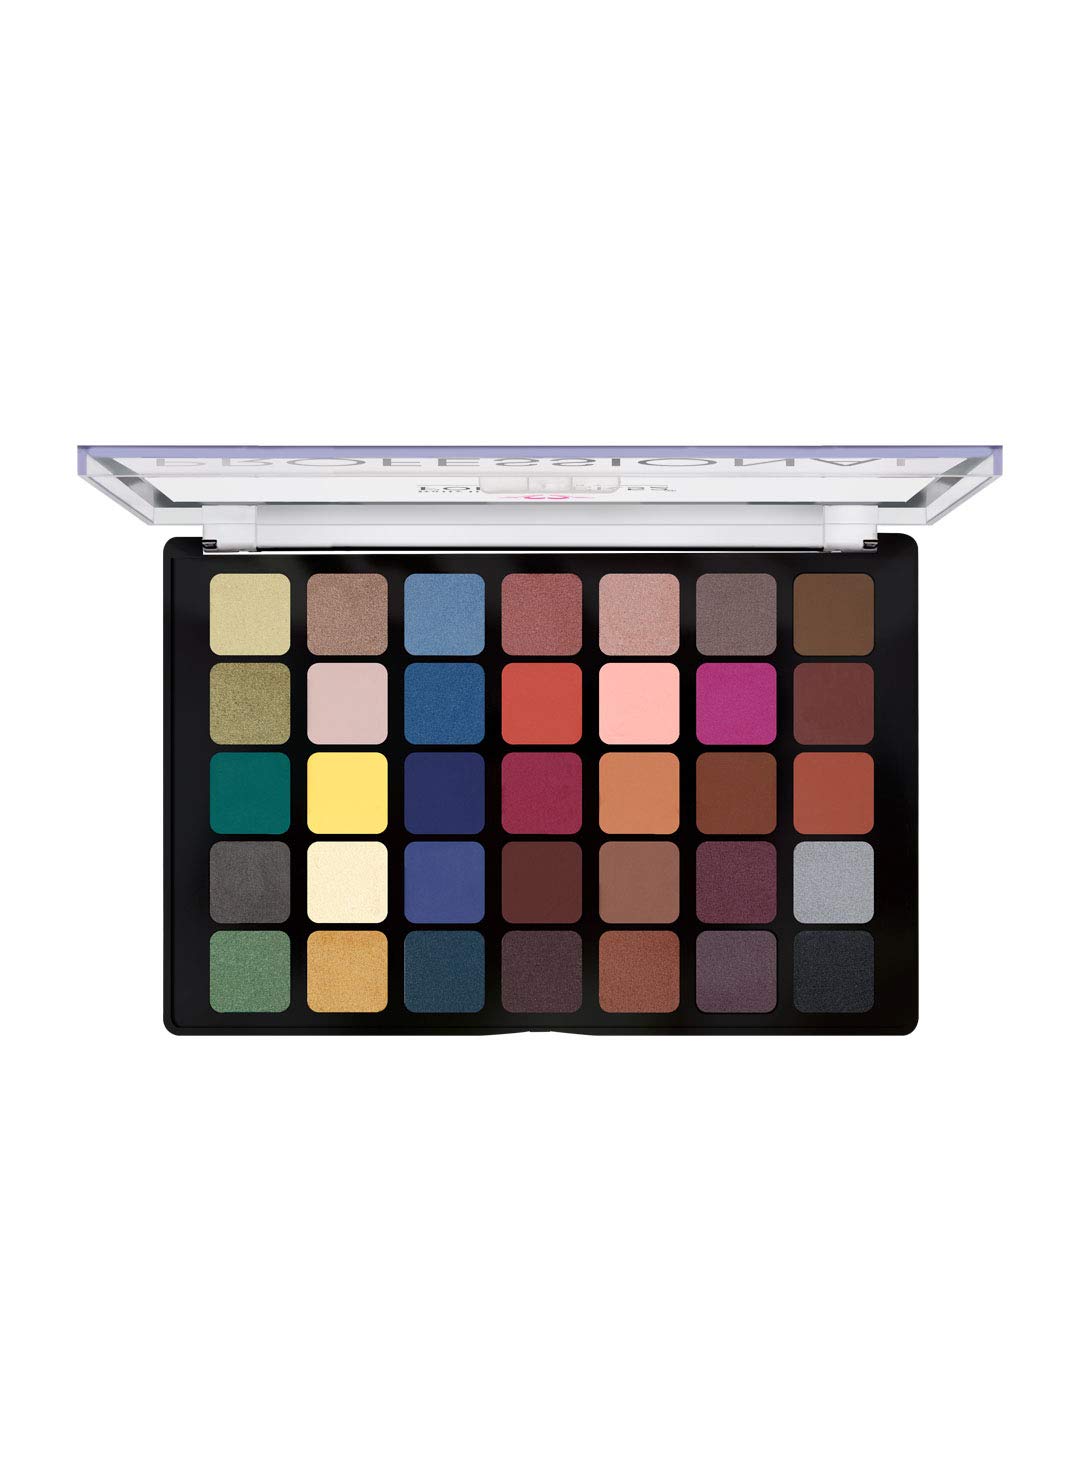 Daily Life Forever52 35Multi-Color Ultimate Edition Eyeshadow Palette Long Lasting & Easy-To-Blend Multicolor Eye makeup Palette with Flawless Matte and Metalic Finish Look, (UEP003) Eye shadow Palete from Forever52